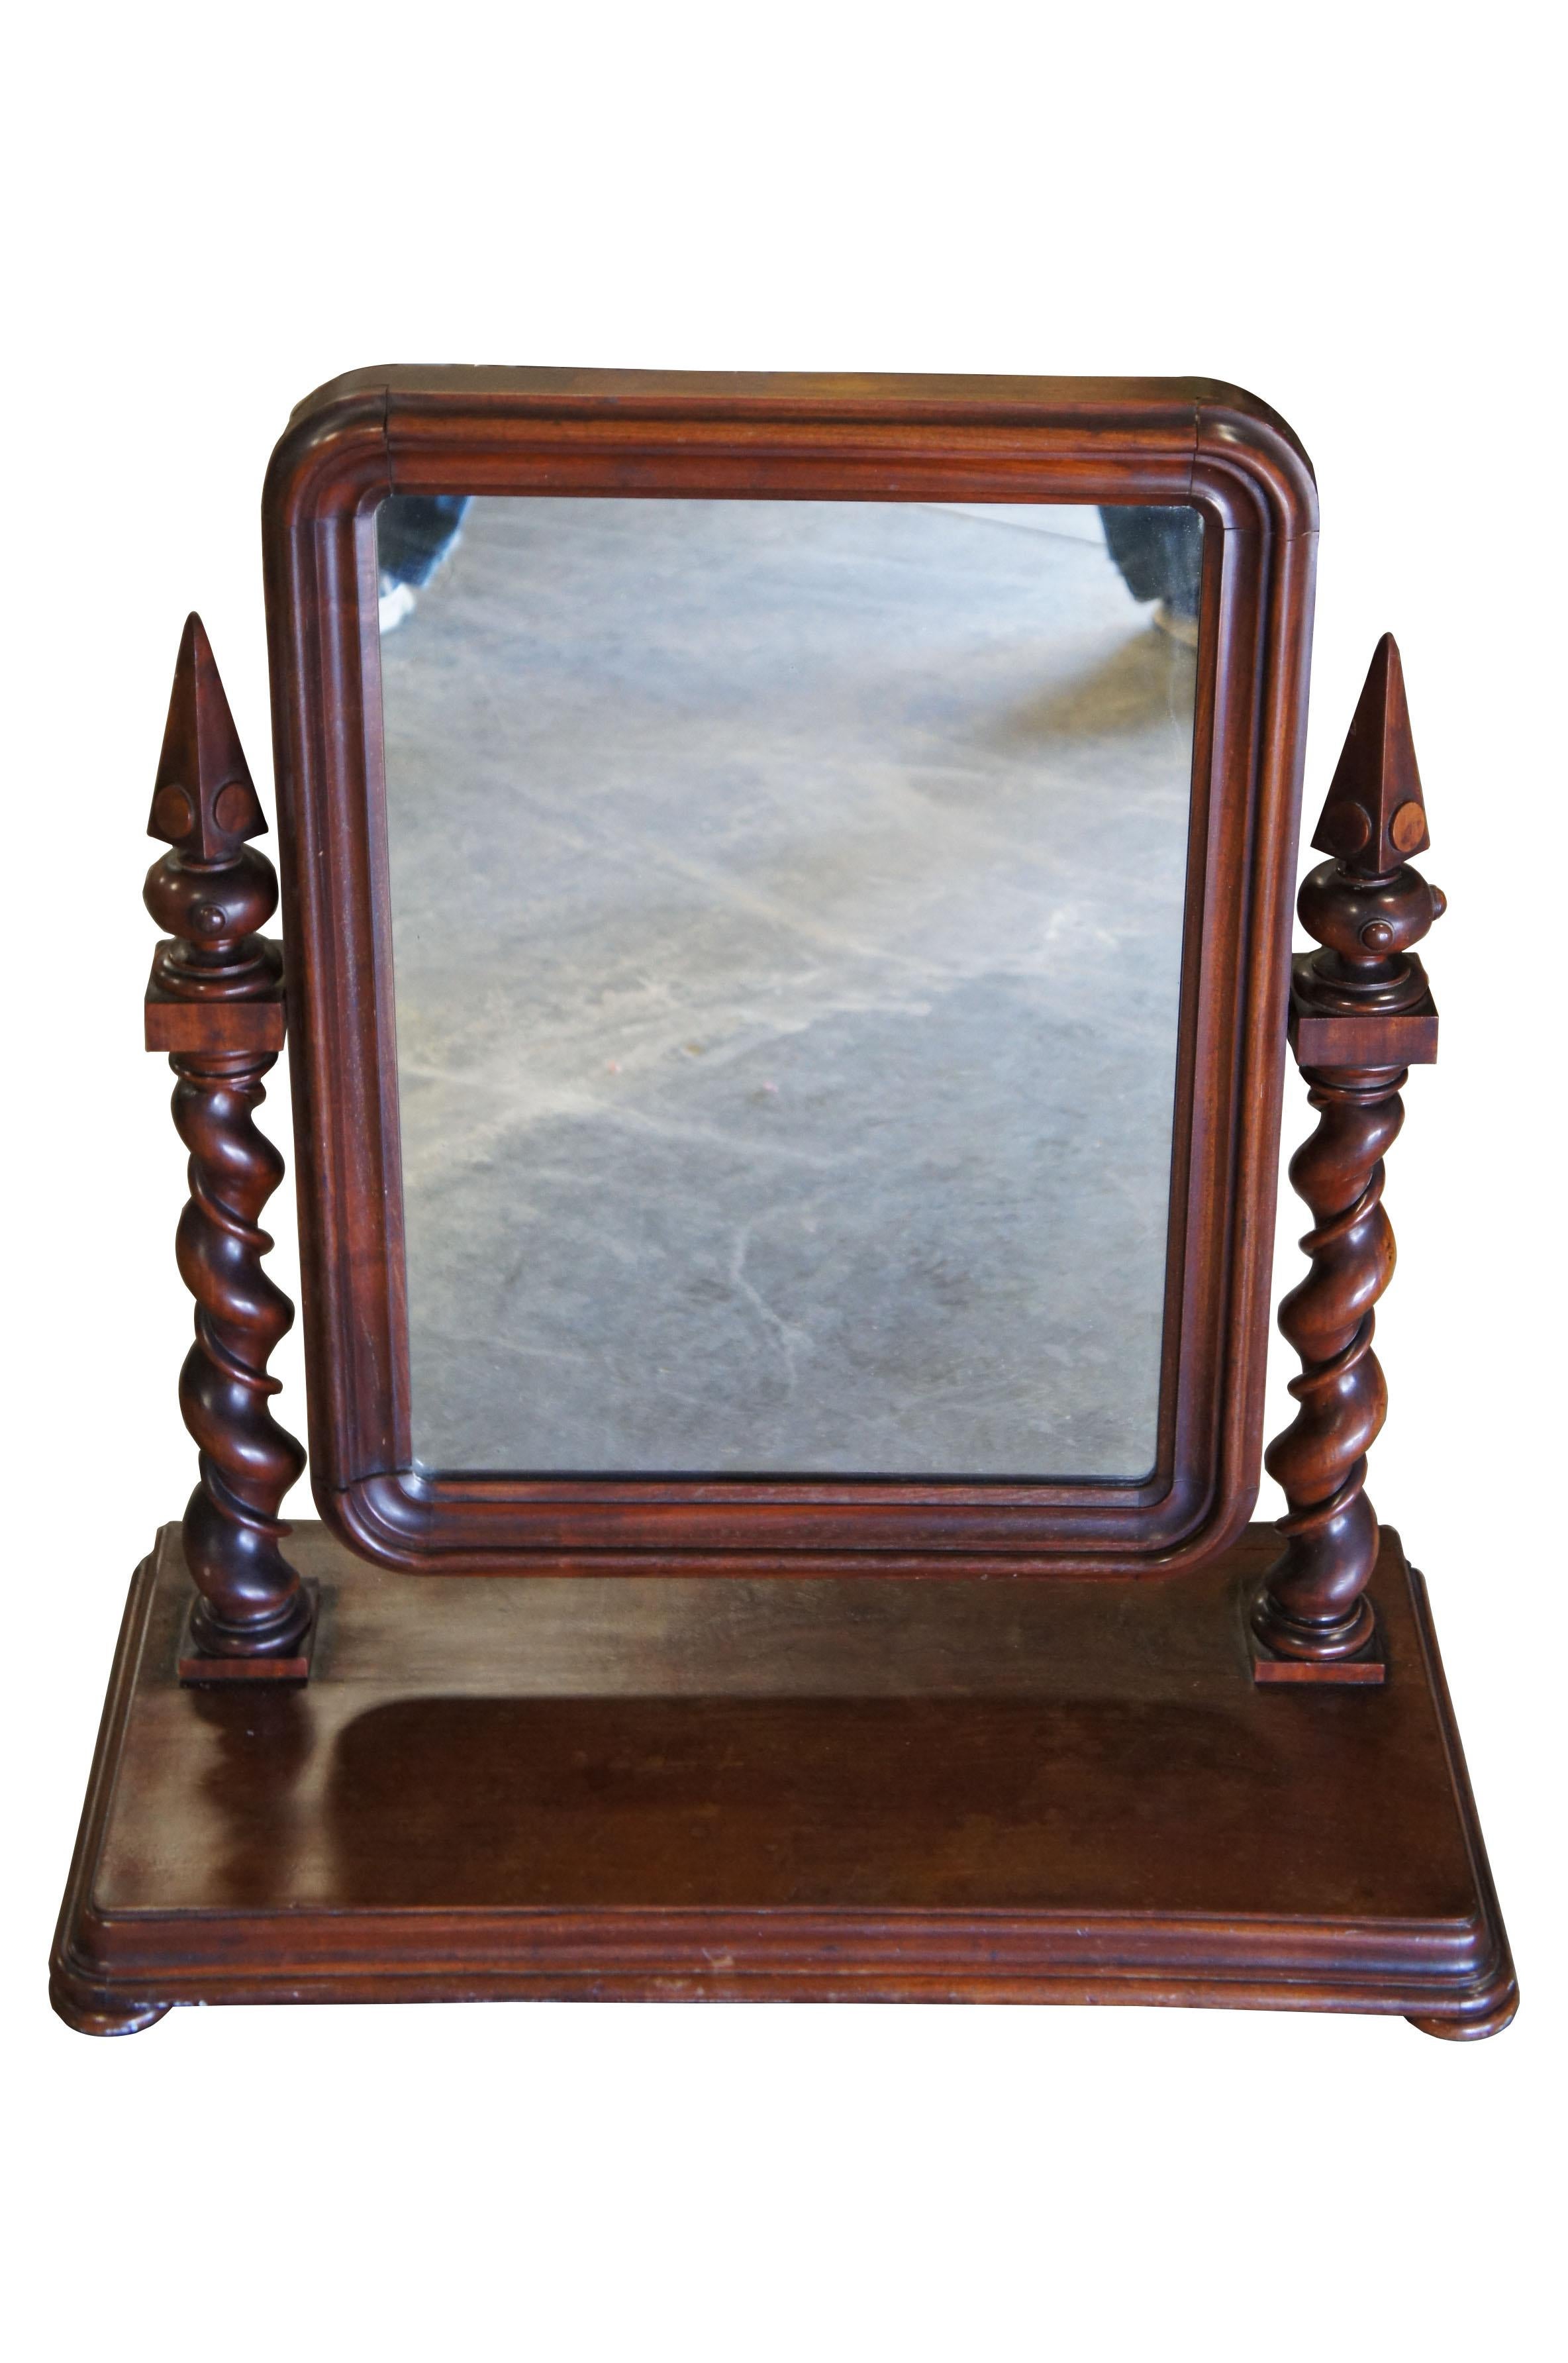 1870s English Empire mahogany gentleman’s dressing shaving mirror barley twist

English Empire gentleman's dressing mirror, circa 1880s. Made from mahogany with a beveled wooden frame supported by exceptional barley twist uprights with pyramid